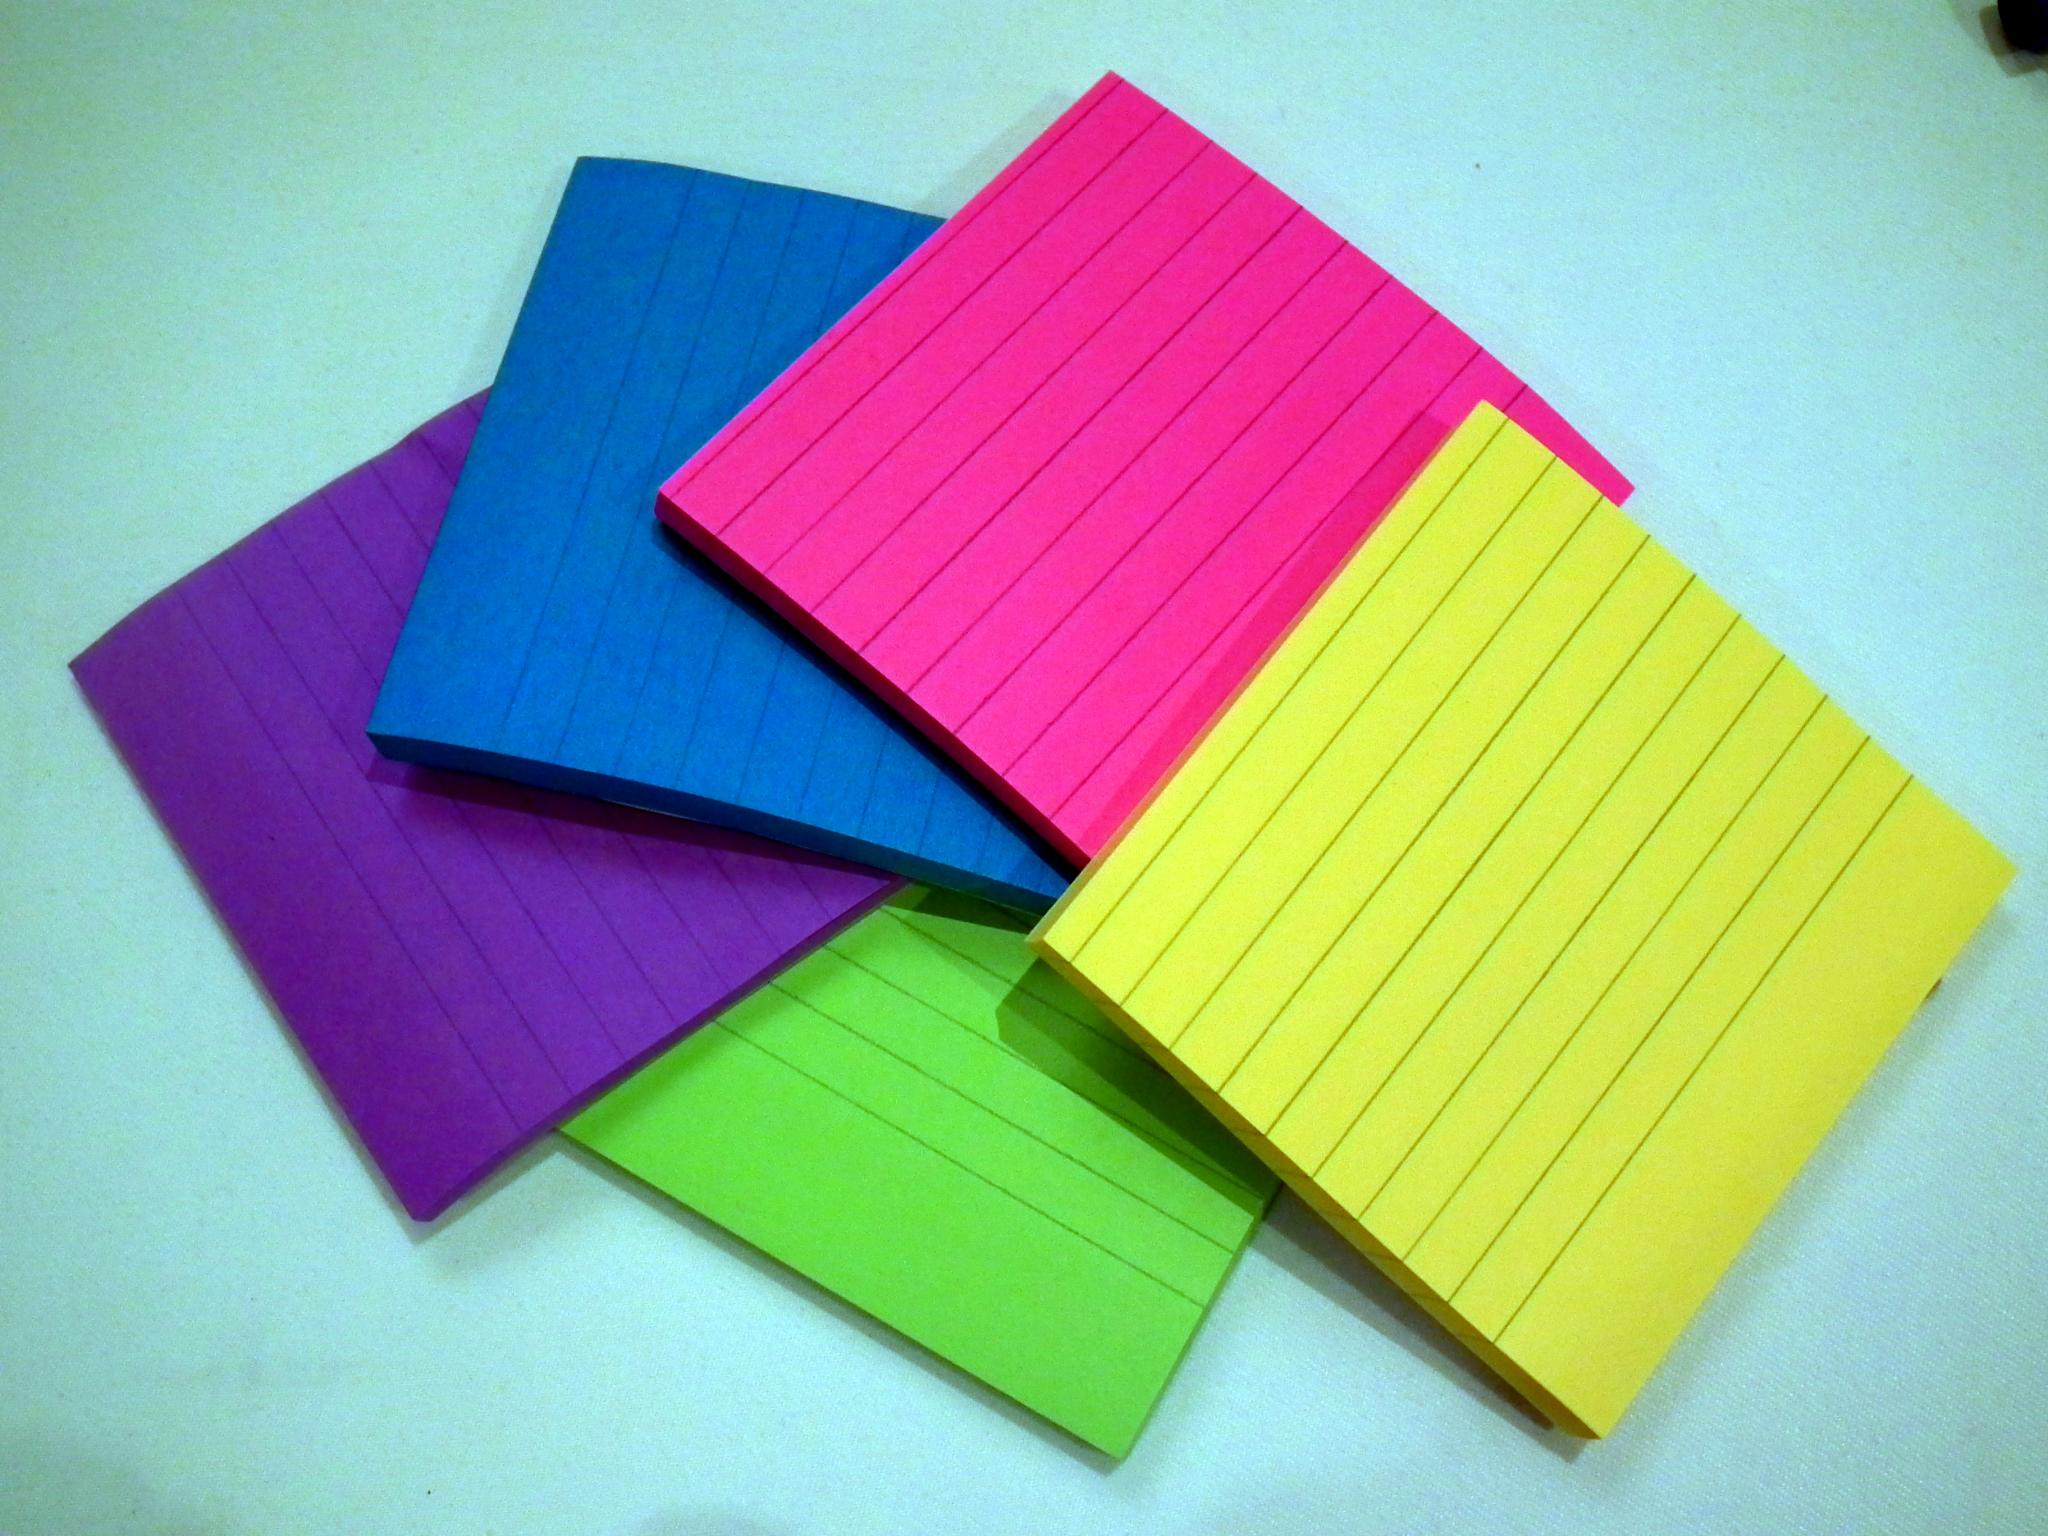 Sticky Notes hd wallpapers ForWallpapers.com